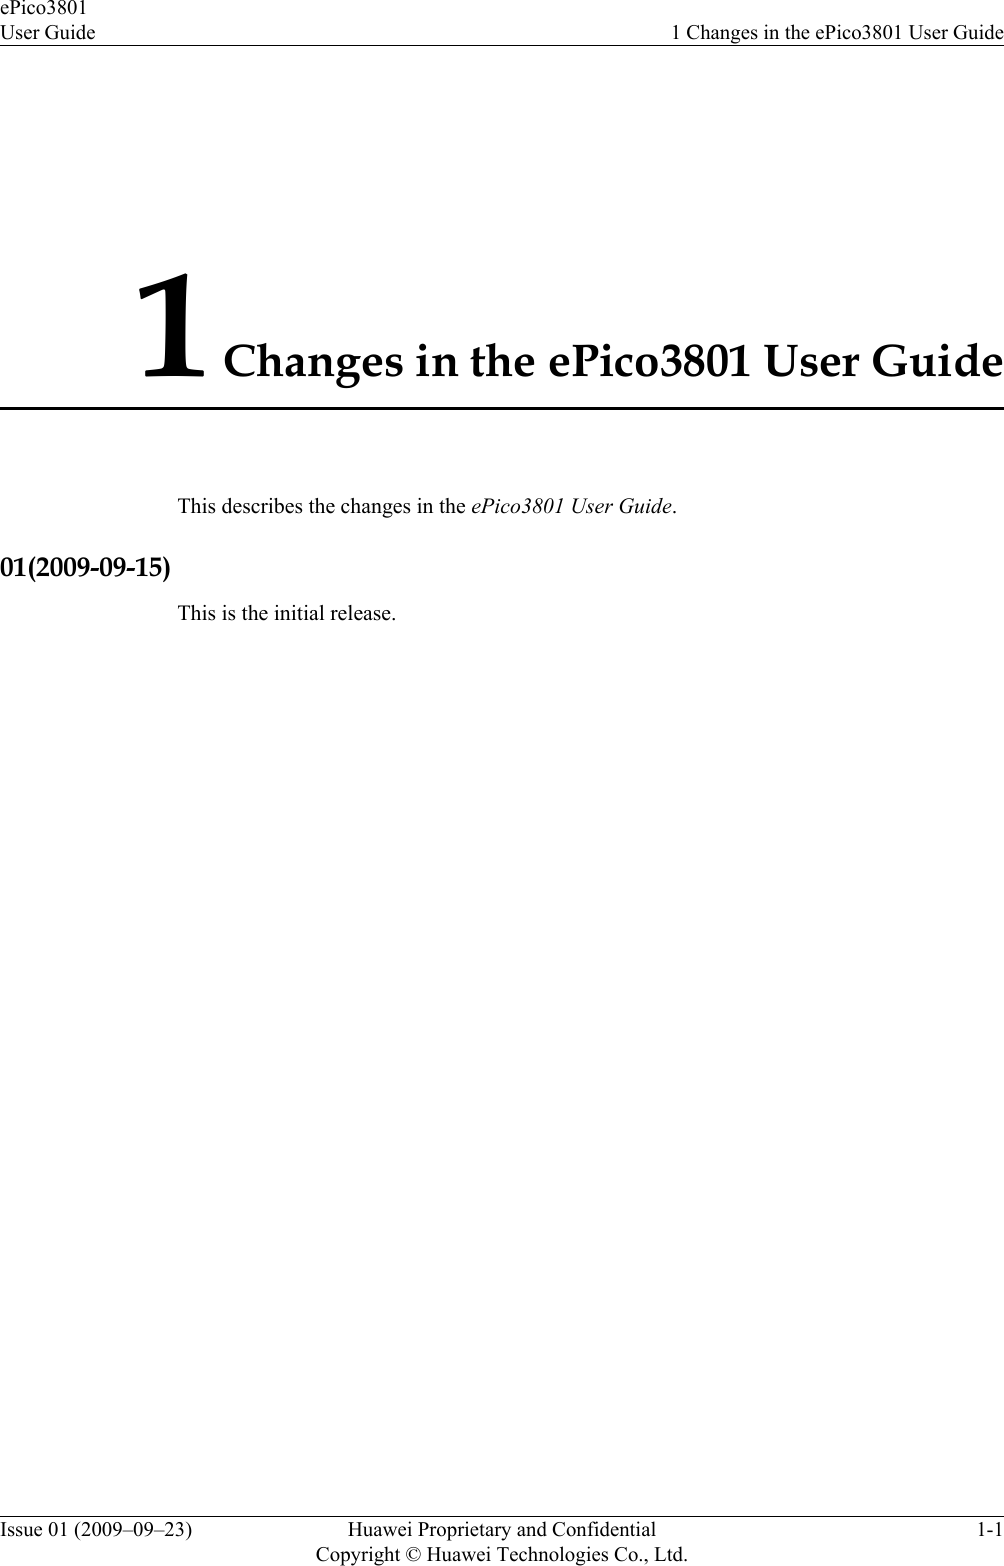 1 Changes in the ePico3801 User GuideThis describes the changes in the ePico3801 User Guide.01(2009-09-15)This is the initial release.ePico3801User Guide 1 Changes in the ePico3801 User GuideIssue 01 (2009–09–23) Huawei Proprietary and ConfidentialCopyright © Huawei Technologies Co., Ltd.1-1